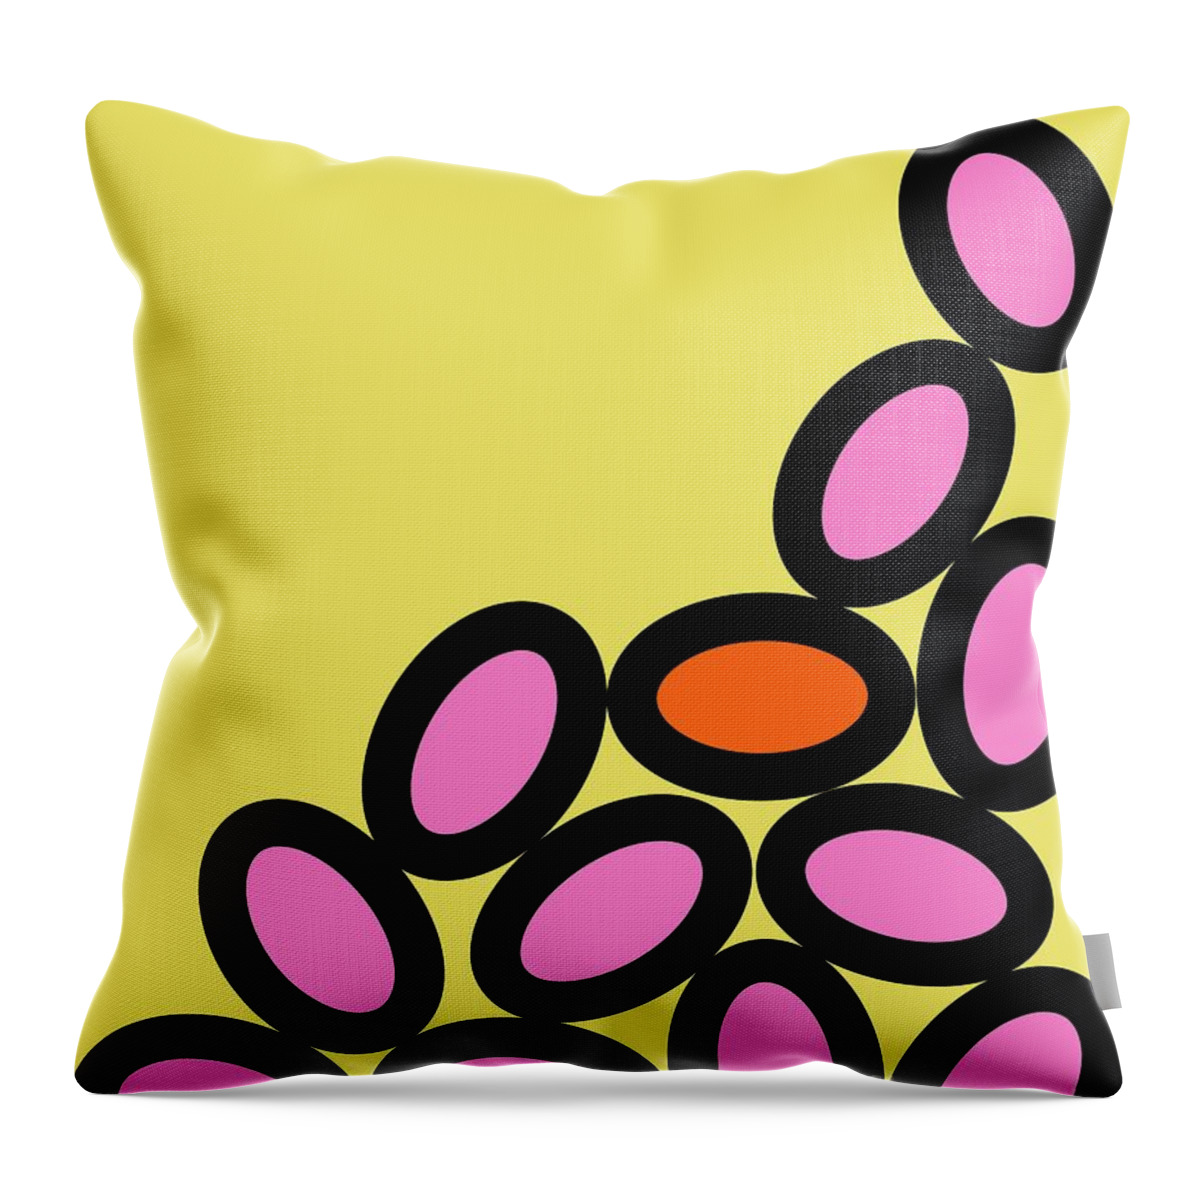 Abstract Throw Pillow featuring the digital art Abstract Ovals on Yellow by Donna Mibus